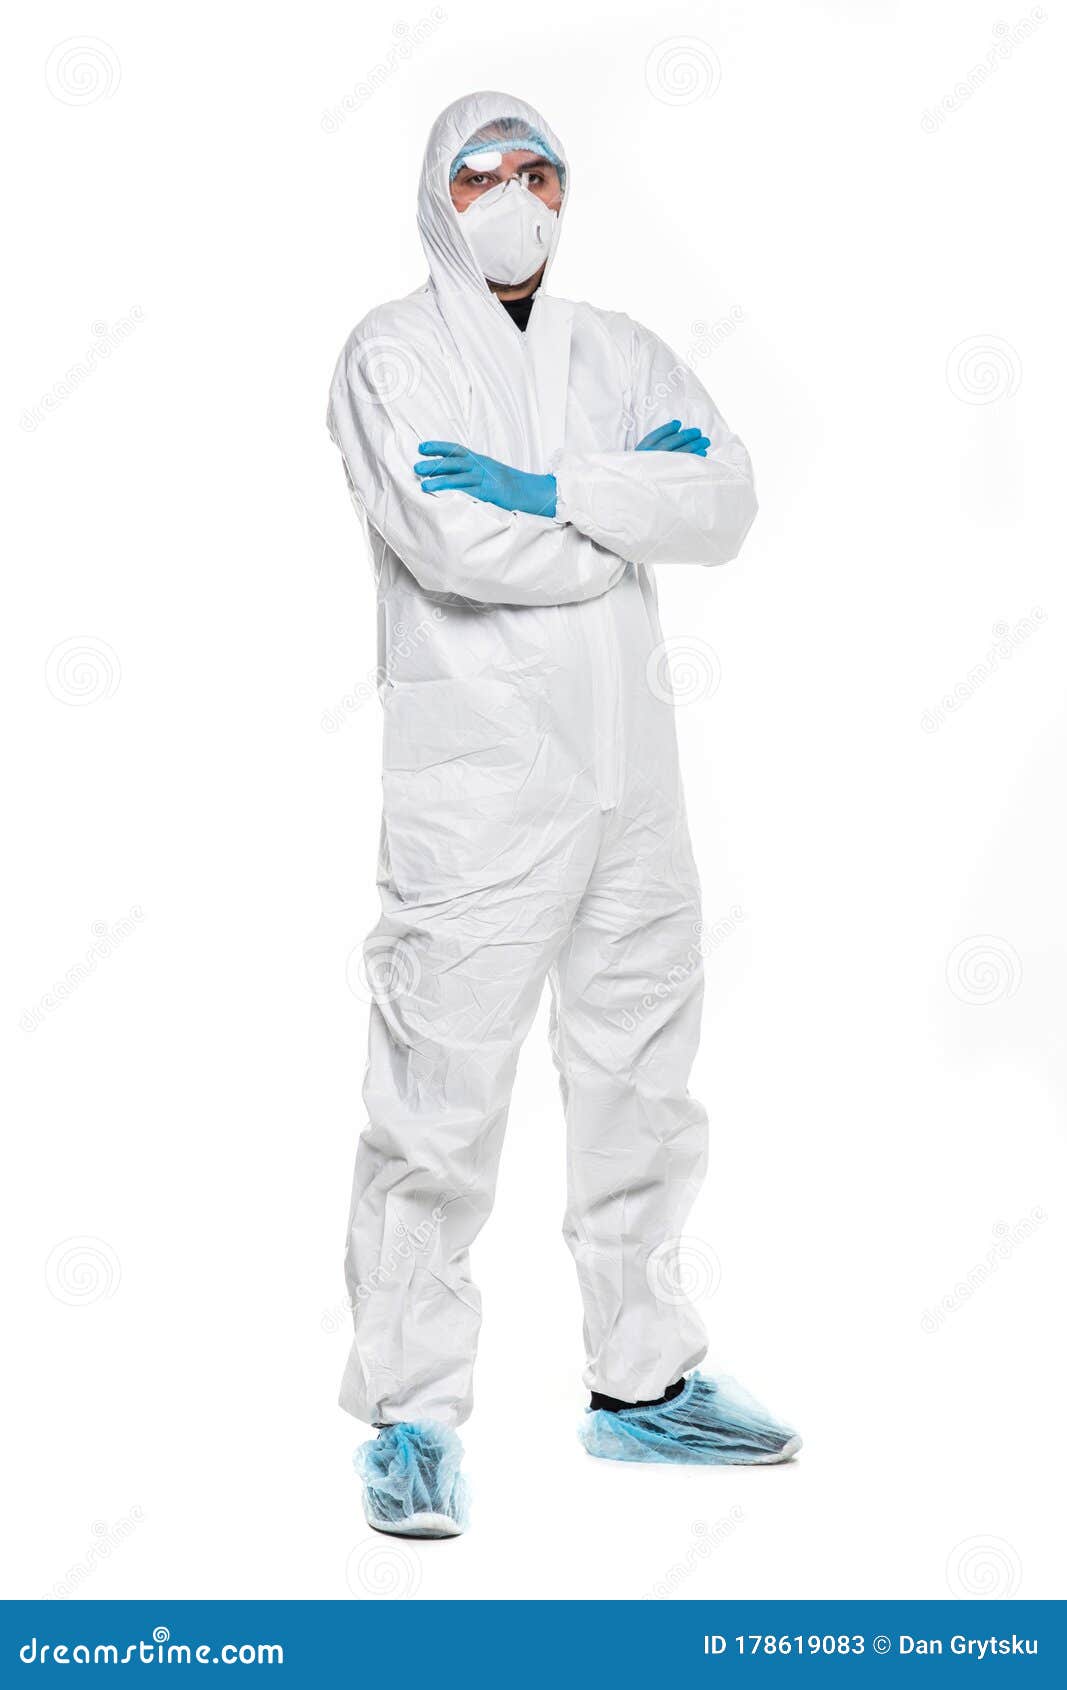 young man in chemical protective suit making stop gesture on white background. virus research